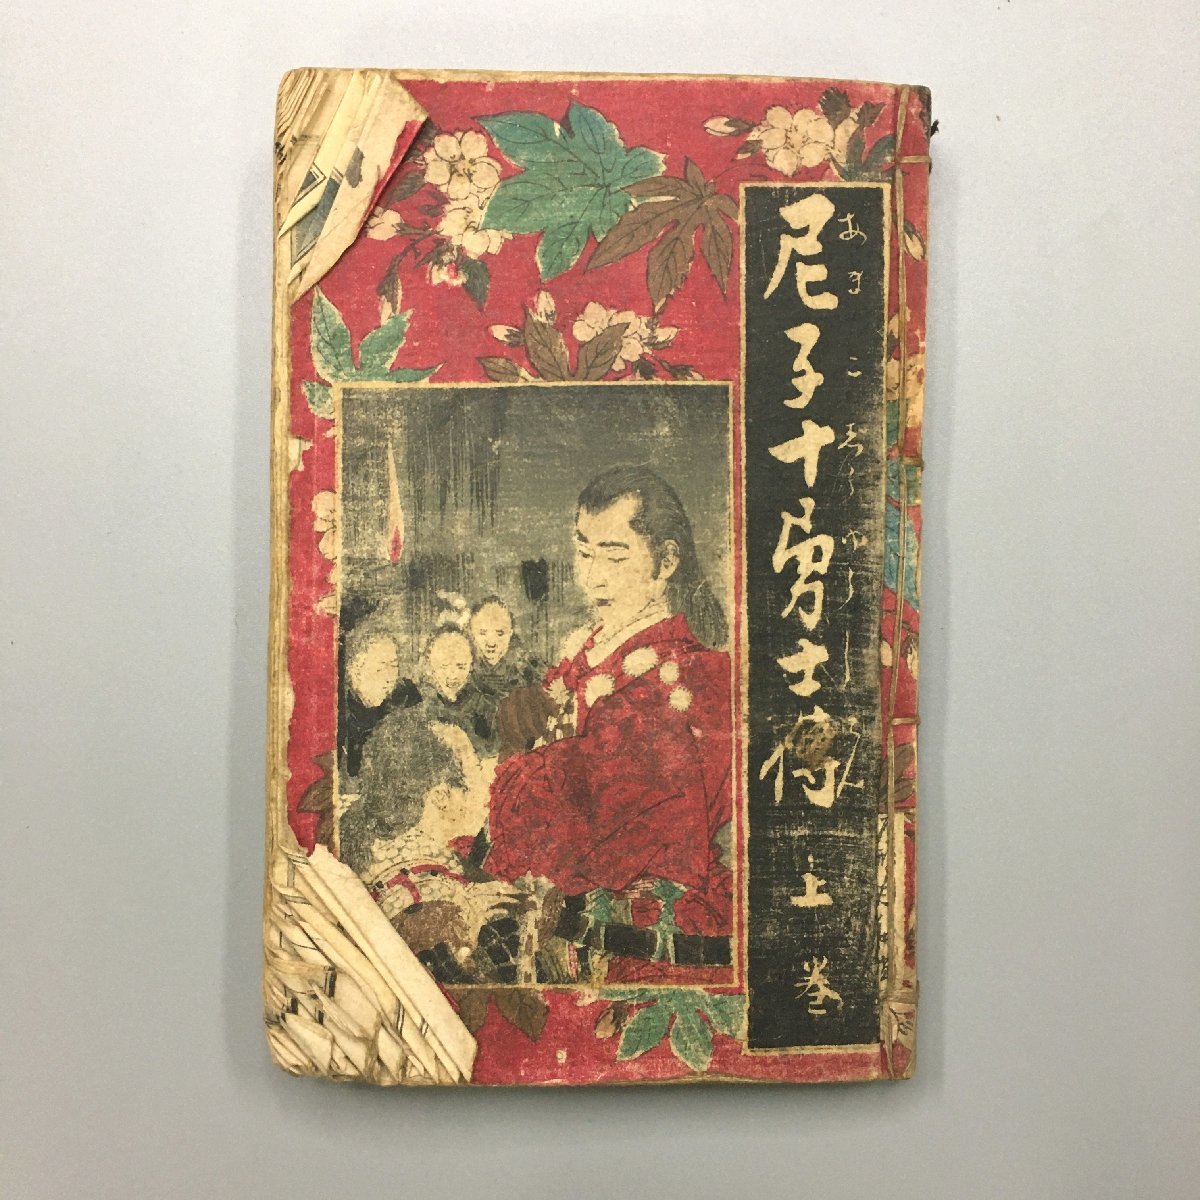 The Legend of the Amago Ten Braves, Vol. 1, 2, and 3, Complete Edition, illustrated by Ogata Gekko, woodblock print, cover, Shunyodo, 1883, by Wada Atsutaro, Ukiyo-e, Nishiki-e, picture book, Painting, Ukiyo-e, Prints, others